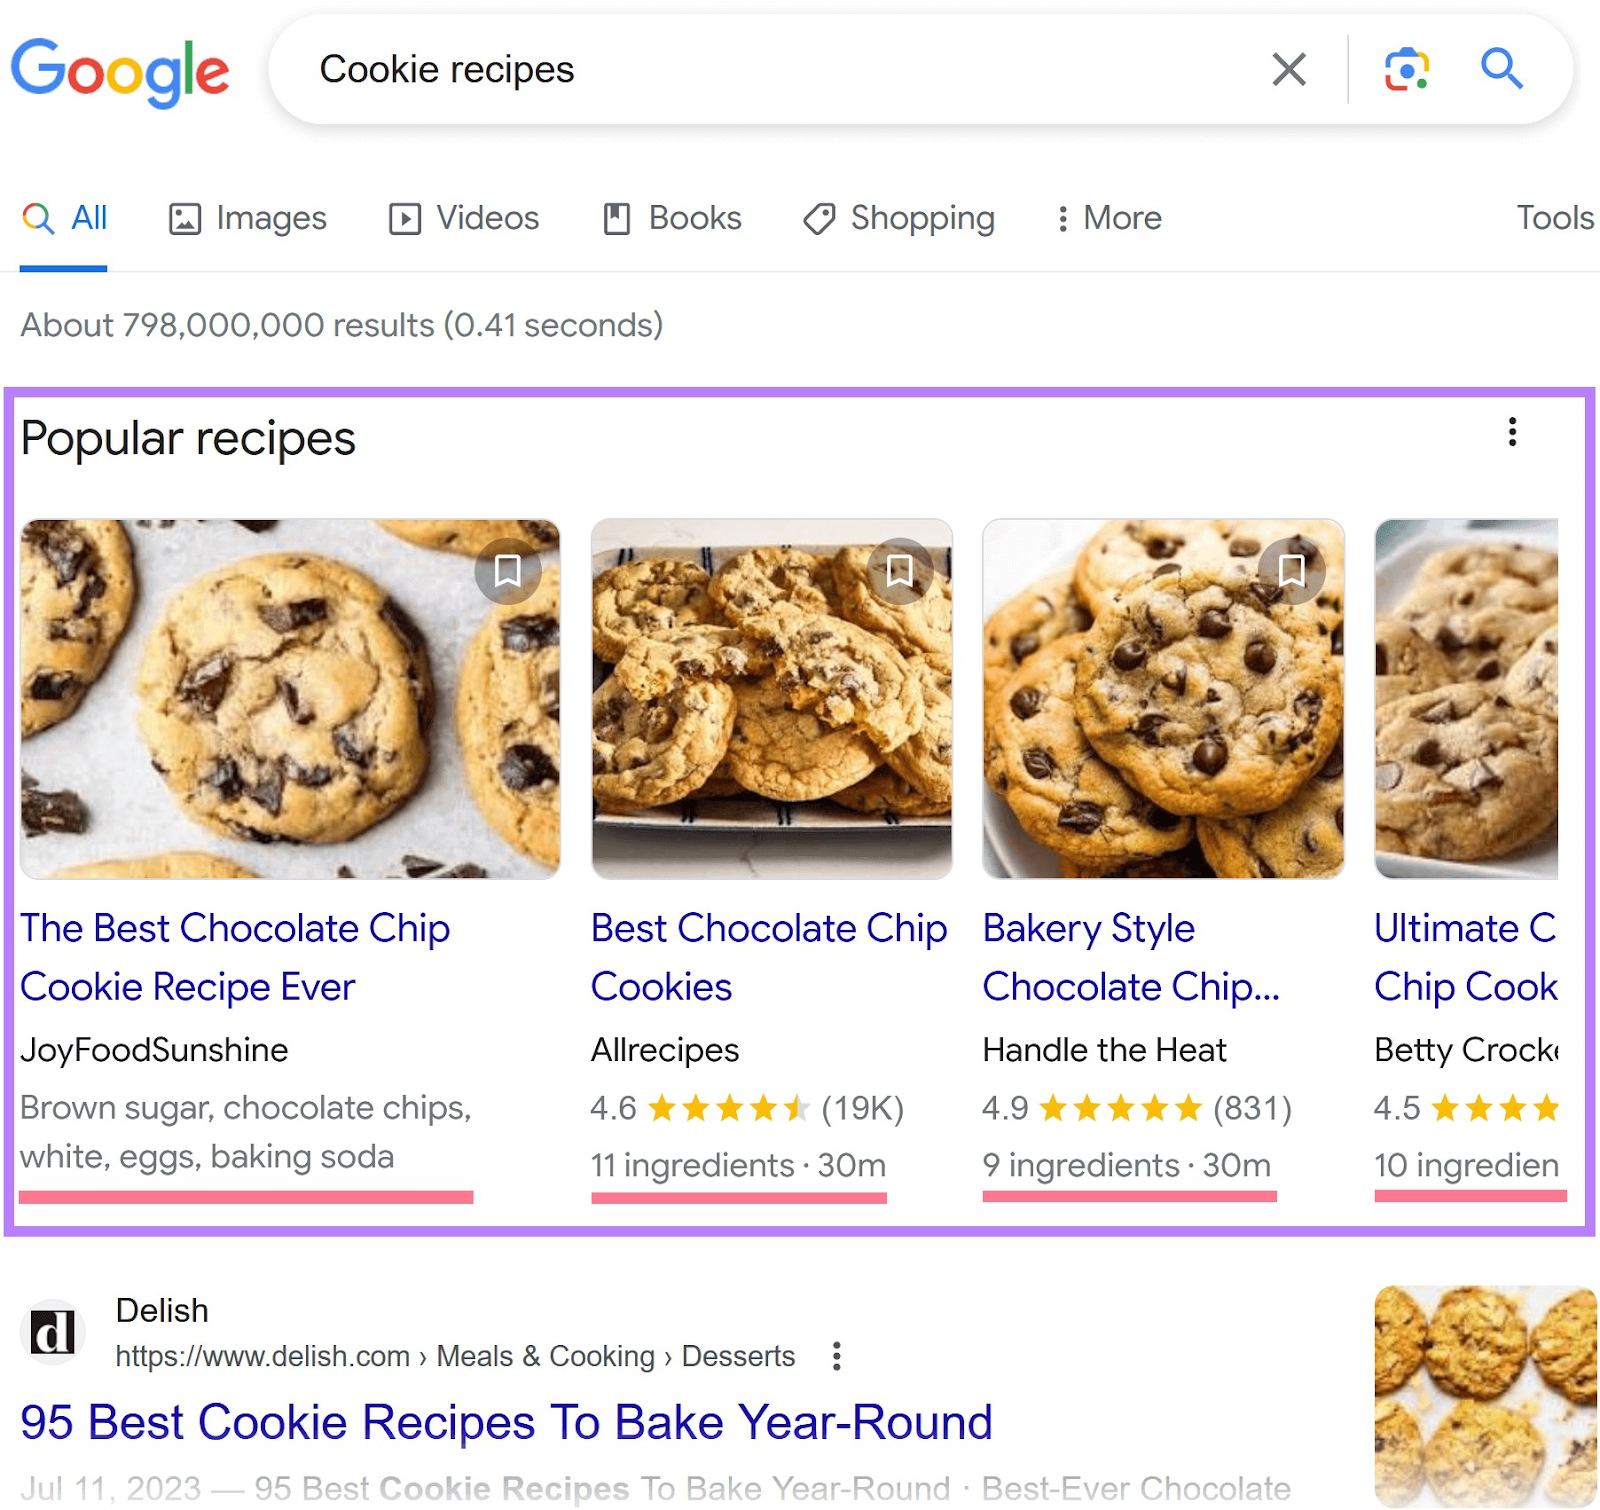 Google SERP for "cookie recipes" search